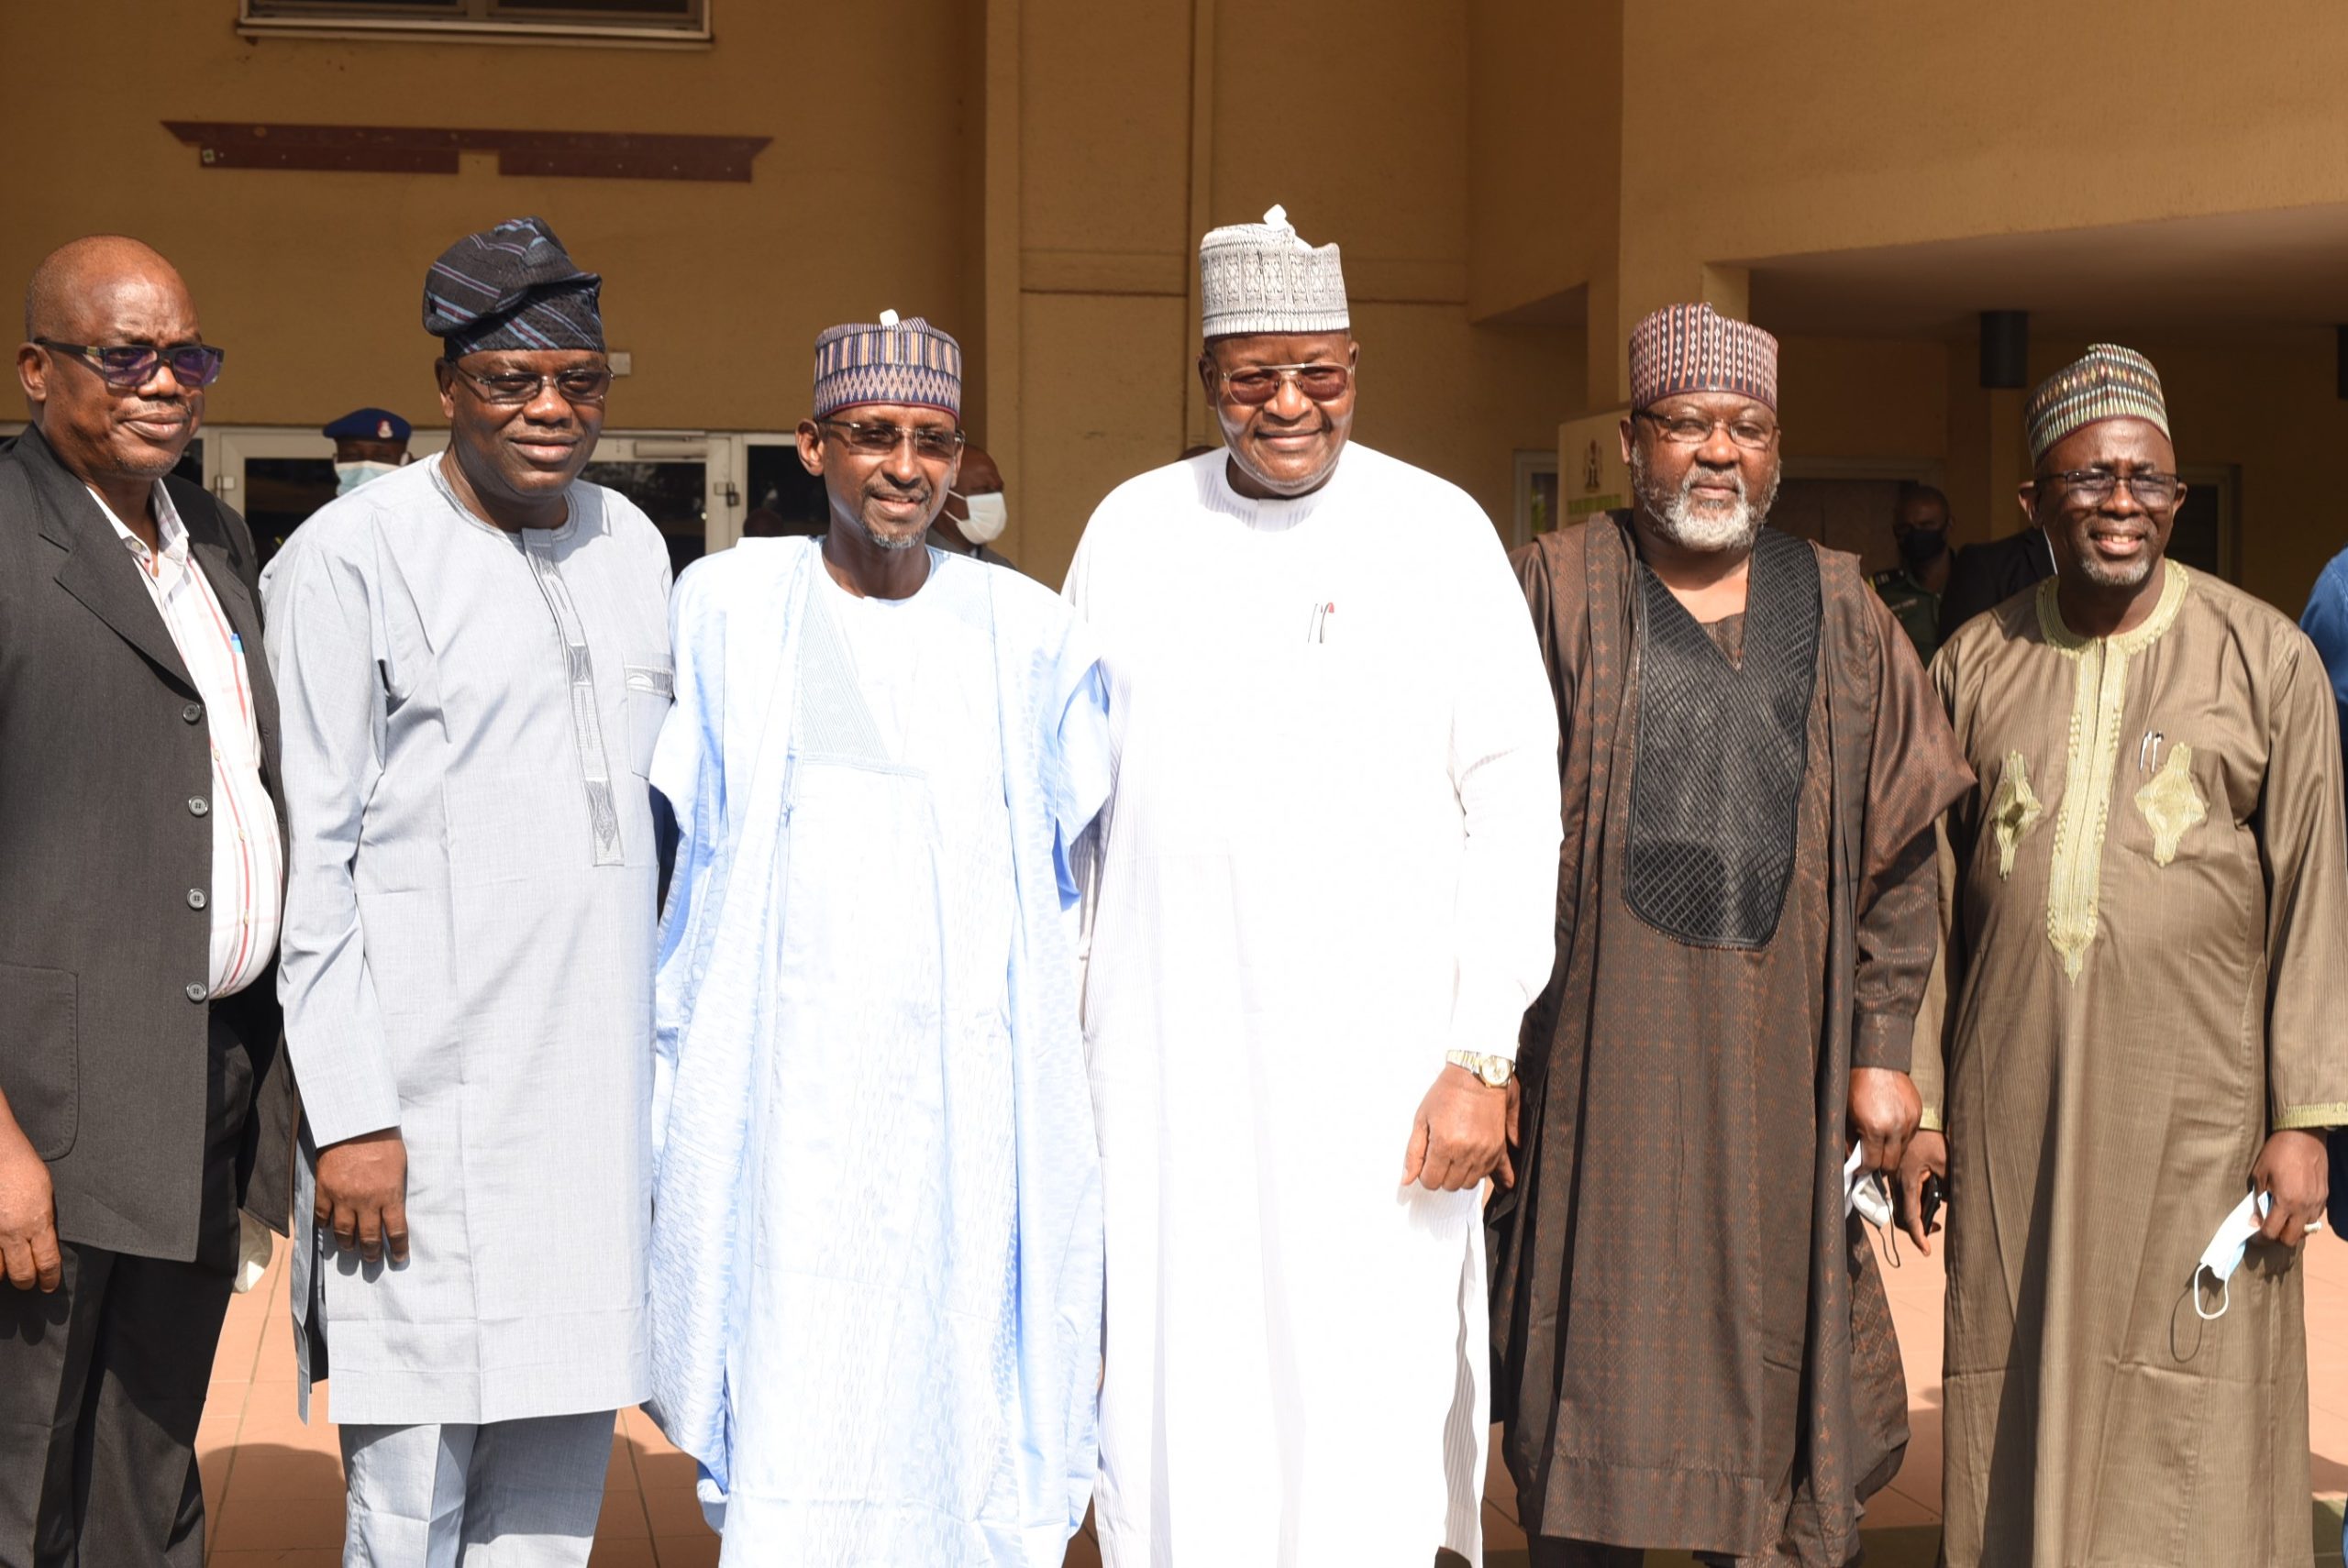 The FCT Minister, Malam Muhammad Bello, has expressed the readiness of the FCT Administration to partner with the Nigeria Communications Commission (NCC) on deployment of 5G broadband in the territory.  Mr Anthony Ogunleye, Chief Press Secretary to the minister, in a statement, on Sunday, in Abuja, said Bello, made the disclosure when he received a delegation of the NCC led by its Chairman, Prof. Adeolu Akande, on a courtesy visit.  He assured the NCC board and management that all pending issues concerning the deployment of telecommunication facilities within the territory, would be resolved with the collaboration of all parties.  According to him, this also included the payment of appropriate charges by telecommunication companies.  Bello, however, reminded his guests that providing infrastructure within the Federal Capital City, was expensive, and that things had been made for the easy deployment of telecommunication facilities.  He directed the setting up of a team, comprising the executive commissioner, technical services, NCC, the executive secretary, Federal Capital Development Authority, (FCDA) and Chief of Staff to the minister, to harmonise and resolve all outstanding issues.  The minister acknowledged the long and harmonious relationship existing between the NCC and the FCTA and extended the administration’s appreciation to the commission for its educational support to schools, within the FCT.  Earlier, Akande had disclosed plans by the NCC to deploy infrastructure to accommodate 5G broadband in the FCT.  He called for a partnership with the FCTA, to increase the number of possible technology deployment sites in the territory.  Also speaking, the Executive Vice Chairman, NCC, Prof. Umar Danbatta, commended the minister and the management of the FCTA, for the infrastructural development in the territory.  Present at the meeting were the Permanent Secretary, FCTA, Mr Olusade Adesola, the Executive Secretary of the FCDA, Shehu Ahmed and the Chief of Staff to the FCT Minister, Malam Bashir Mai-Bornu. The Informant247